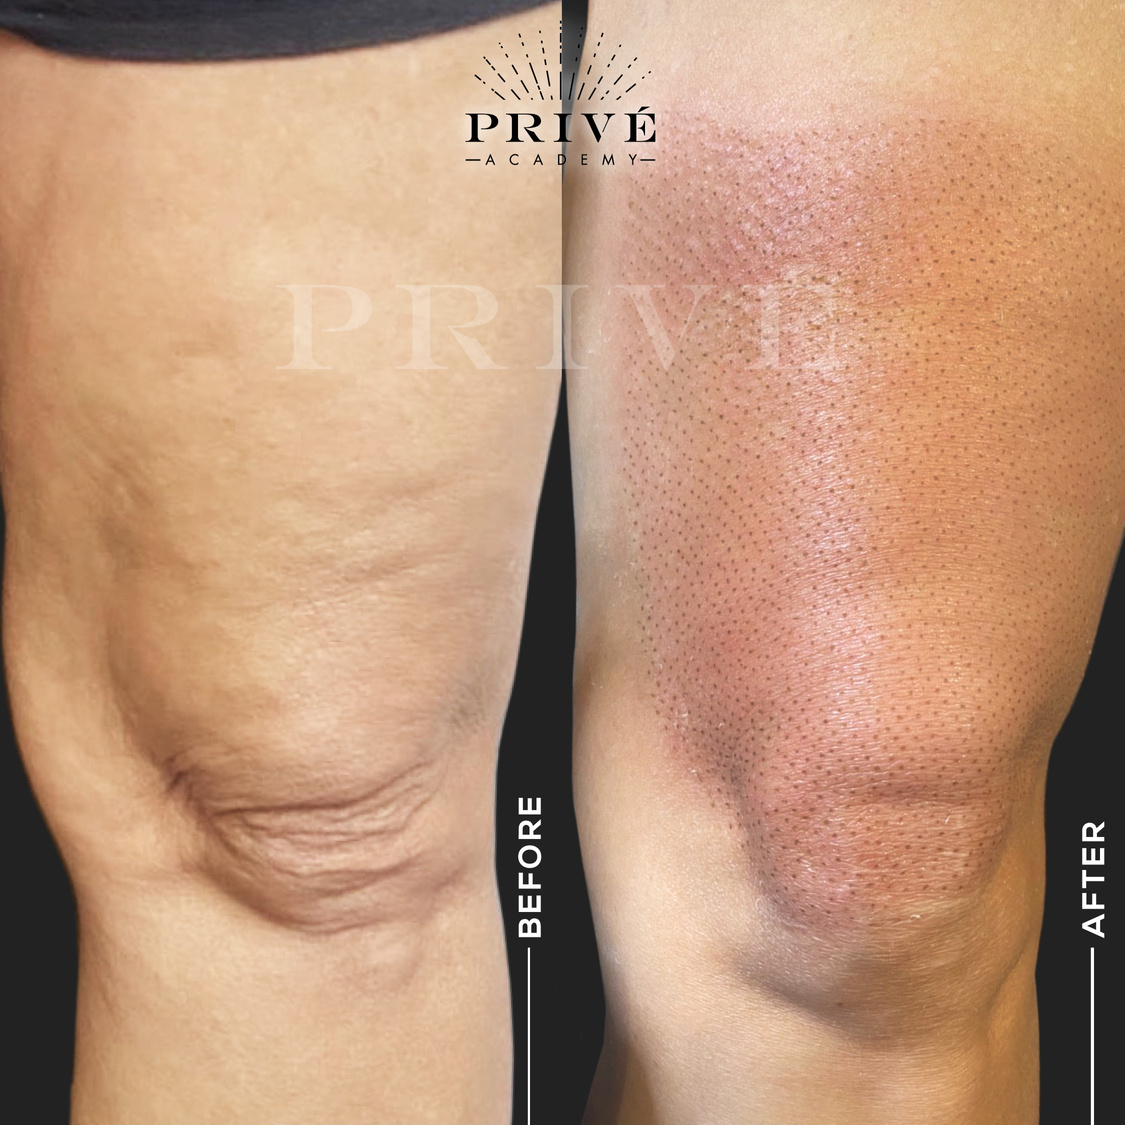 the before and after photos of knee lift from fibroblast plasma pen skin tightening treatment